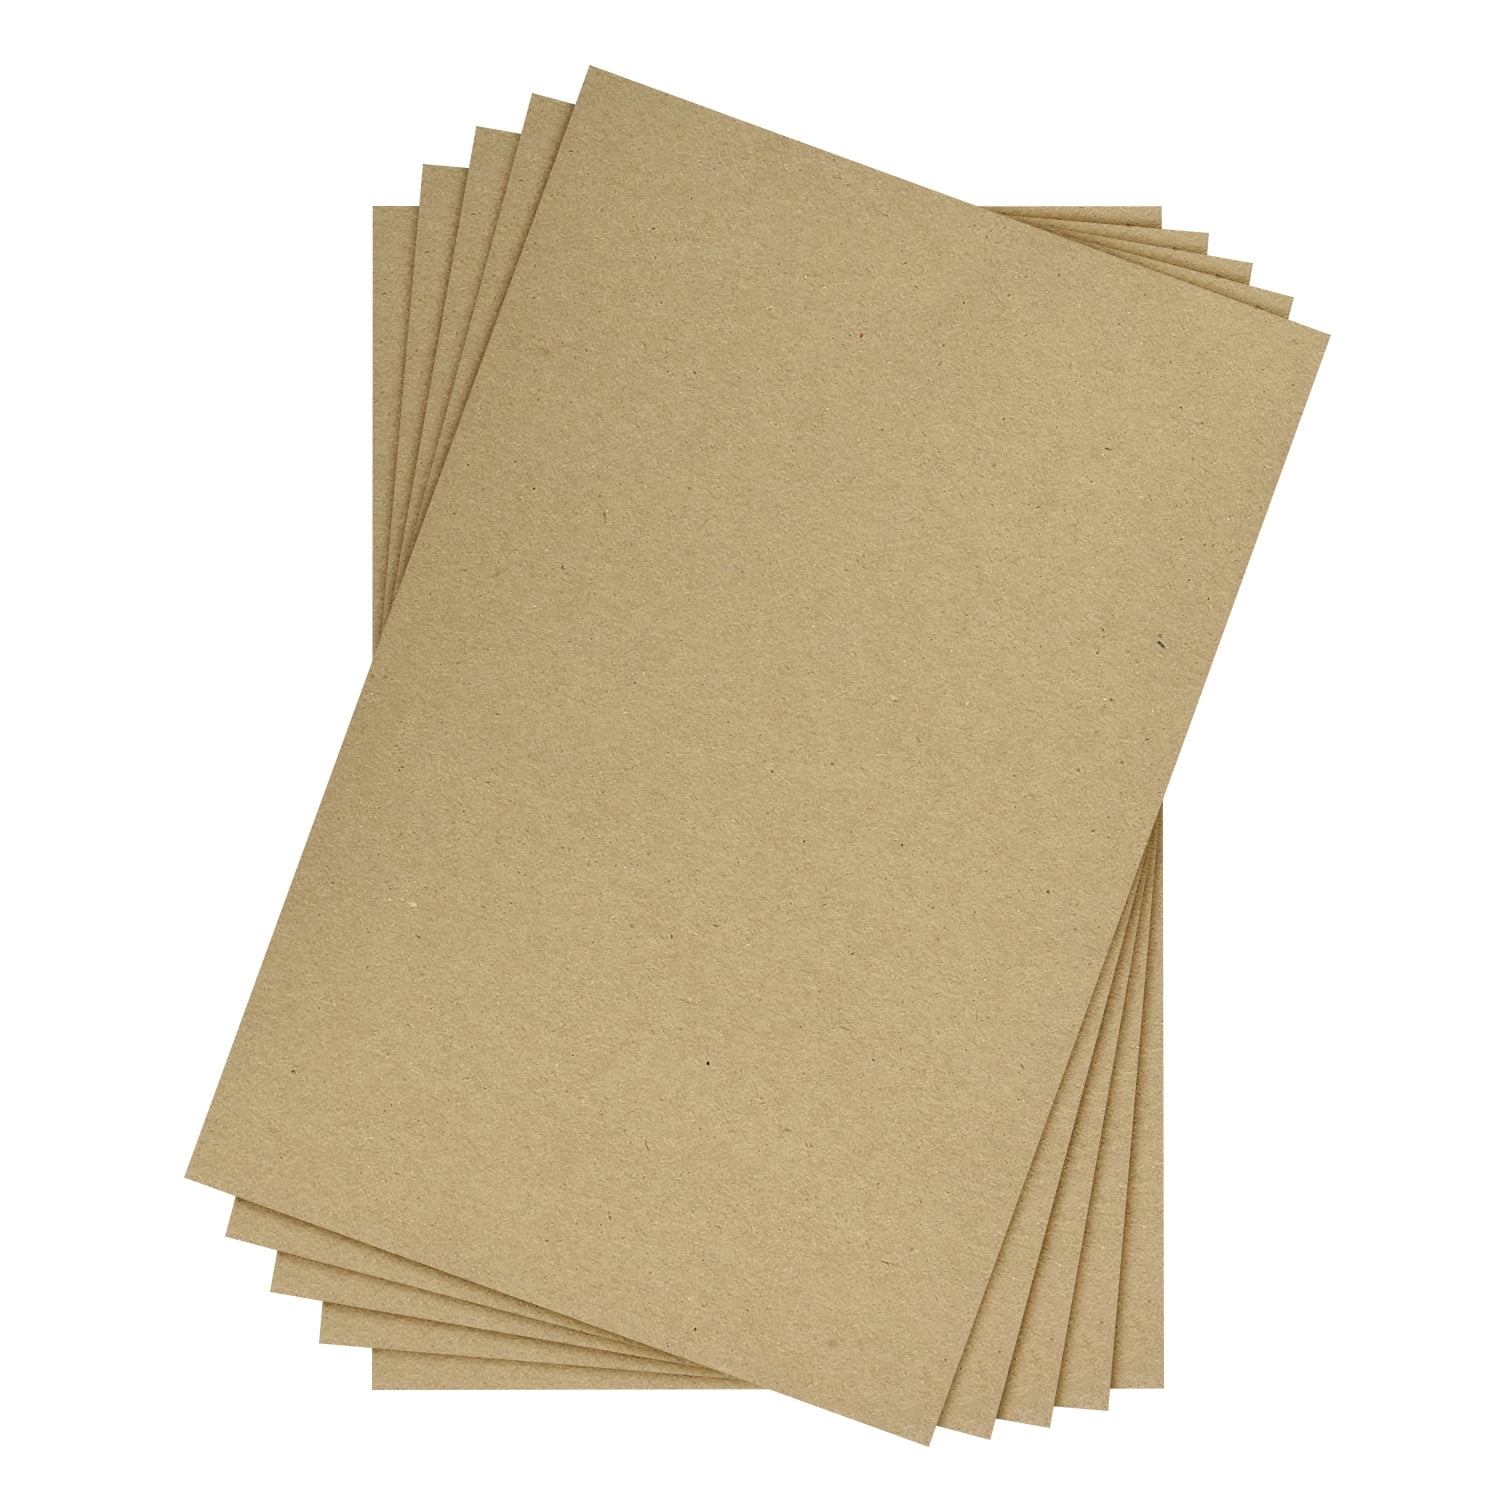 Chipboard Sheets 8.5 x 11 - 100 Sheets of 22 Point Chip Board for Crafts  - This Kraft Board is a Great Alternative to MDF Board and Cardboard Sheets  